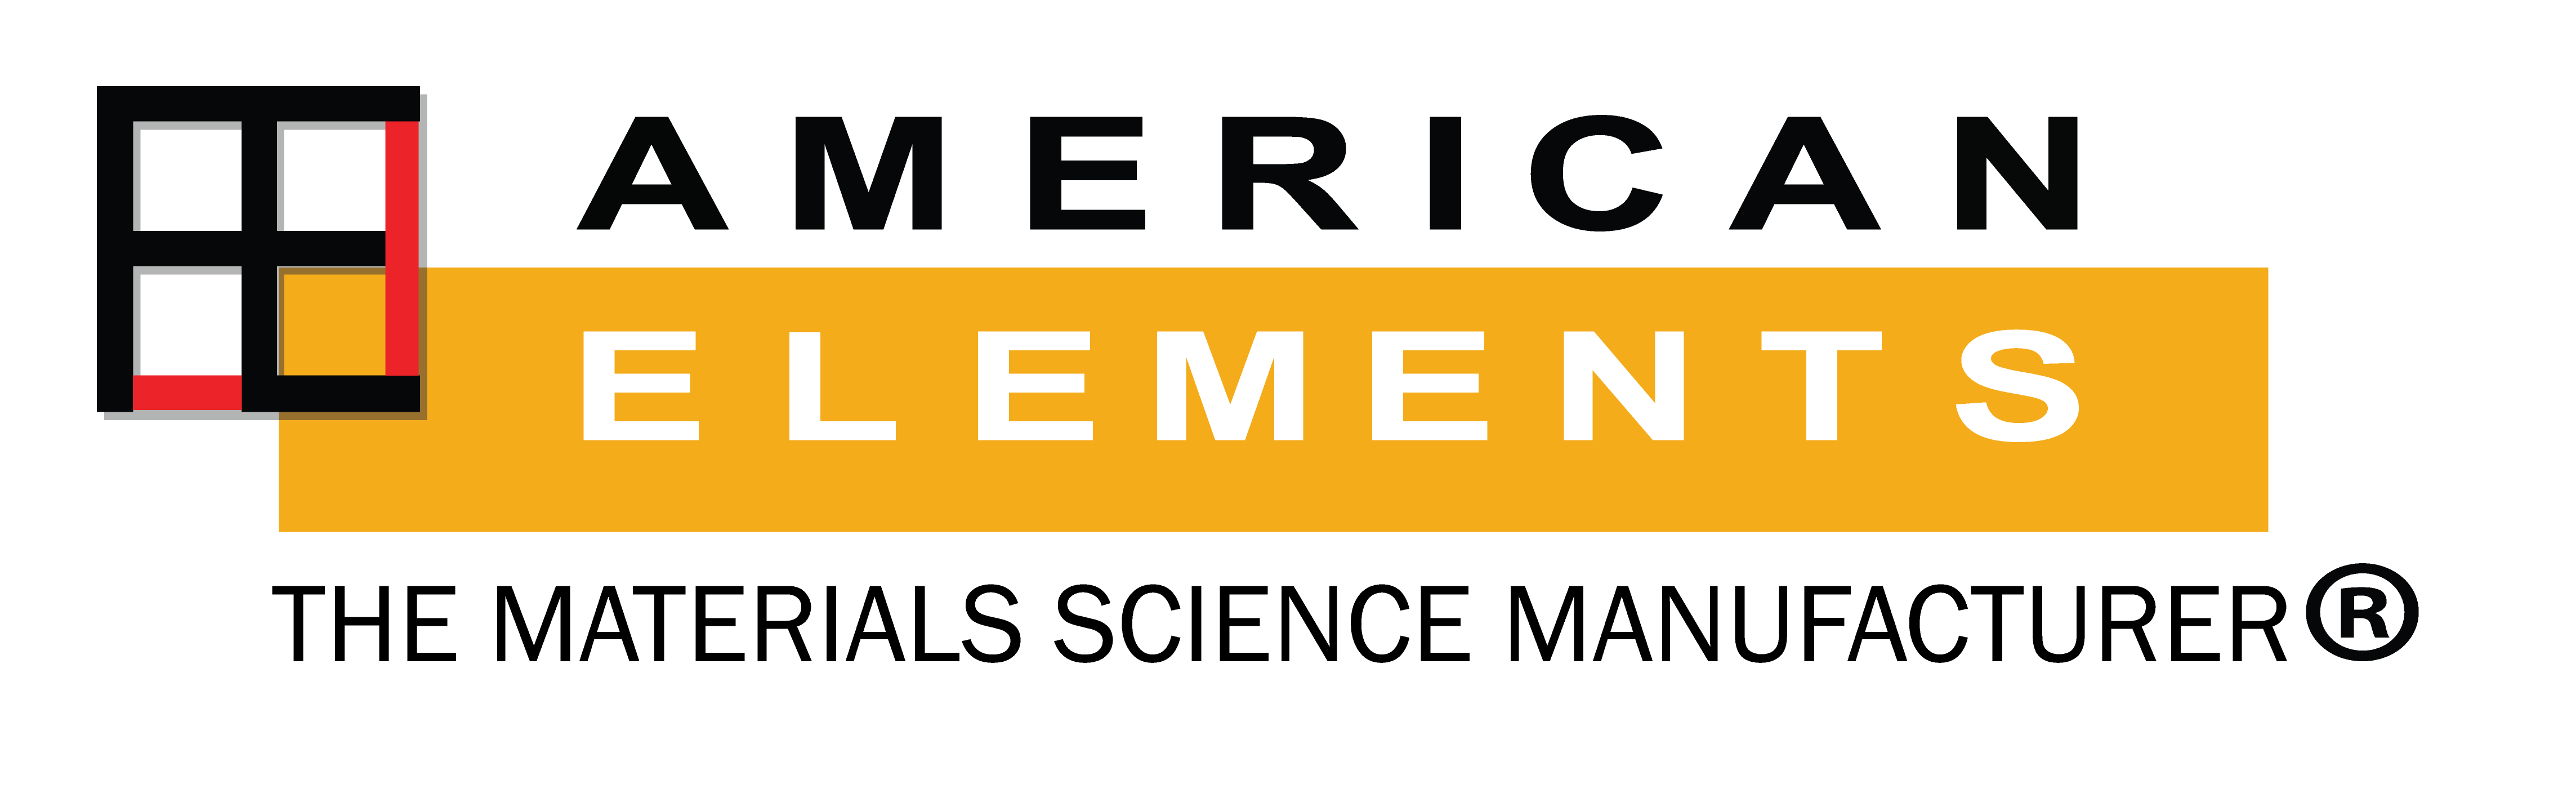 American Elements: global manufacturer of advanced materials for nanotechnology, energy storage, electronics, biotechnology, high purity batteries, fuel cells, photovoltaic solar panels, & materials chemistry